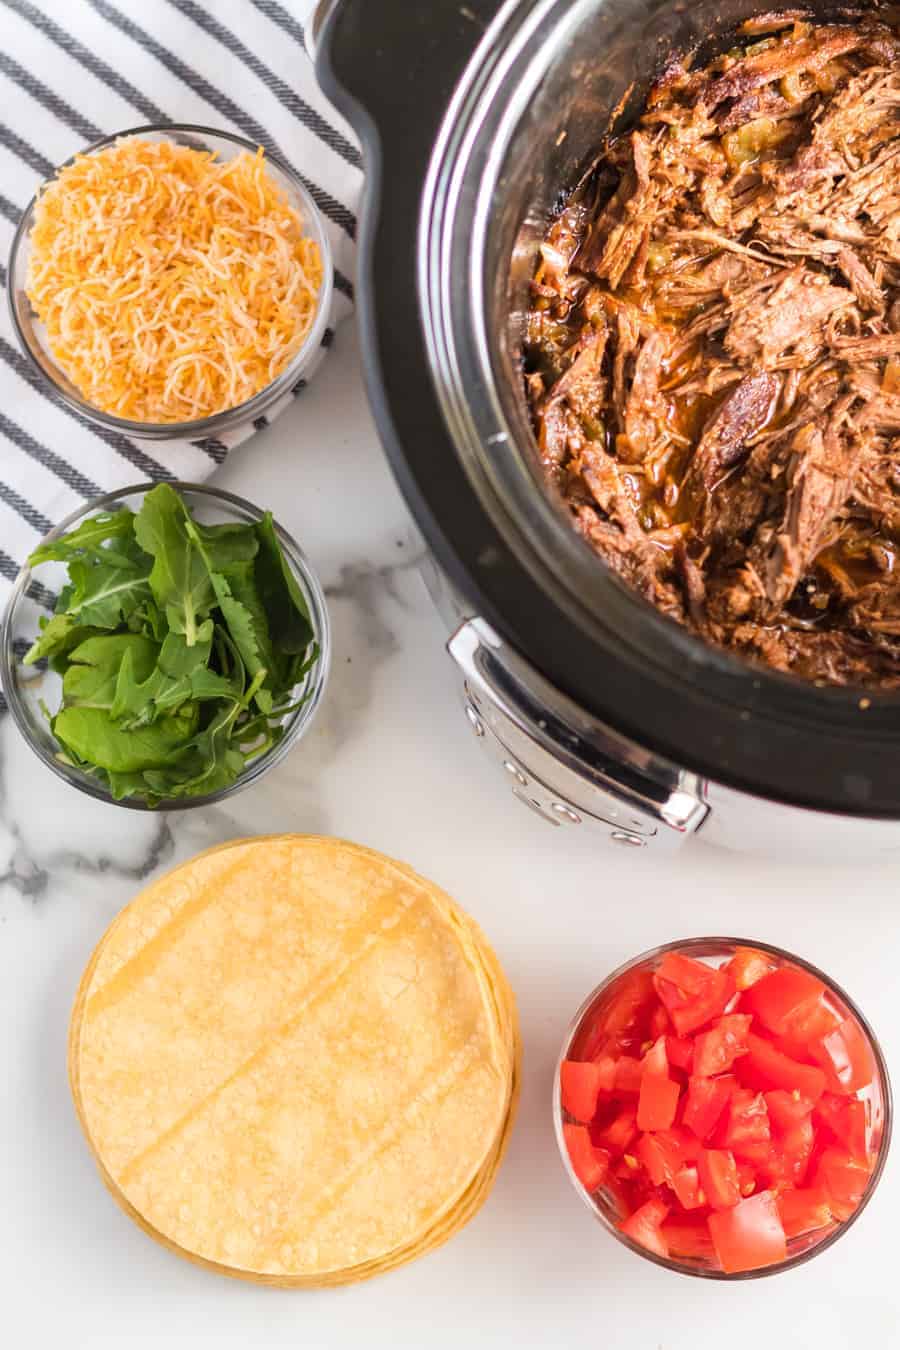 Smoky and hearty Steak Carnitas Meat in the Crock-Pot is one of the best set-it-and-forget-it meals that's exquisitely flavored and makes some tender and rich tacos.